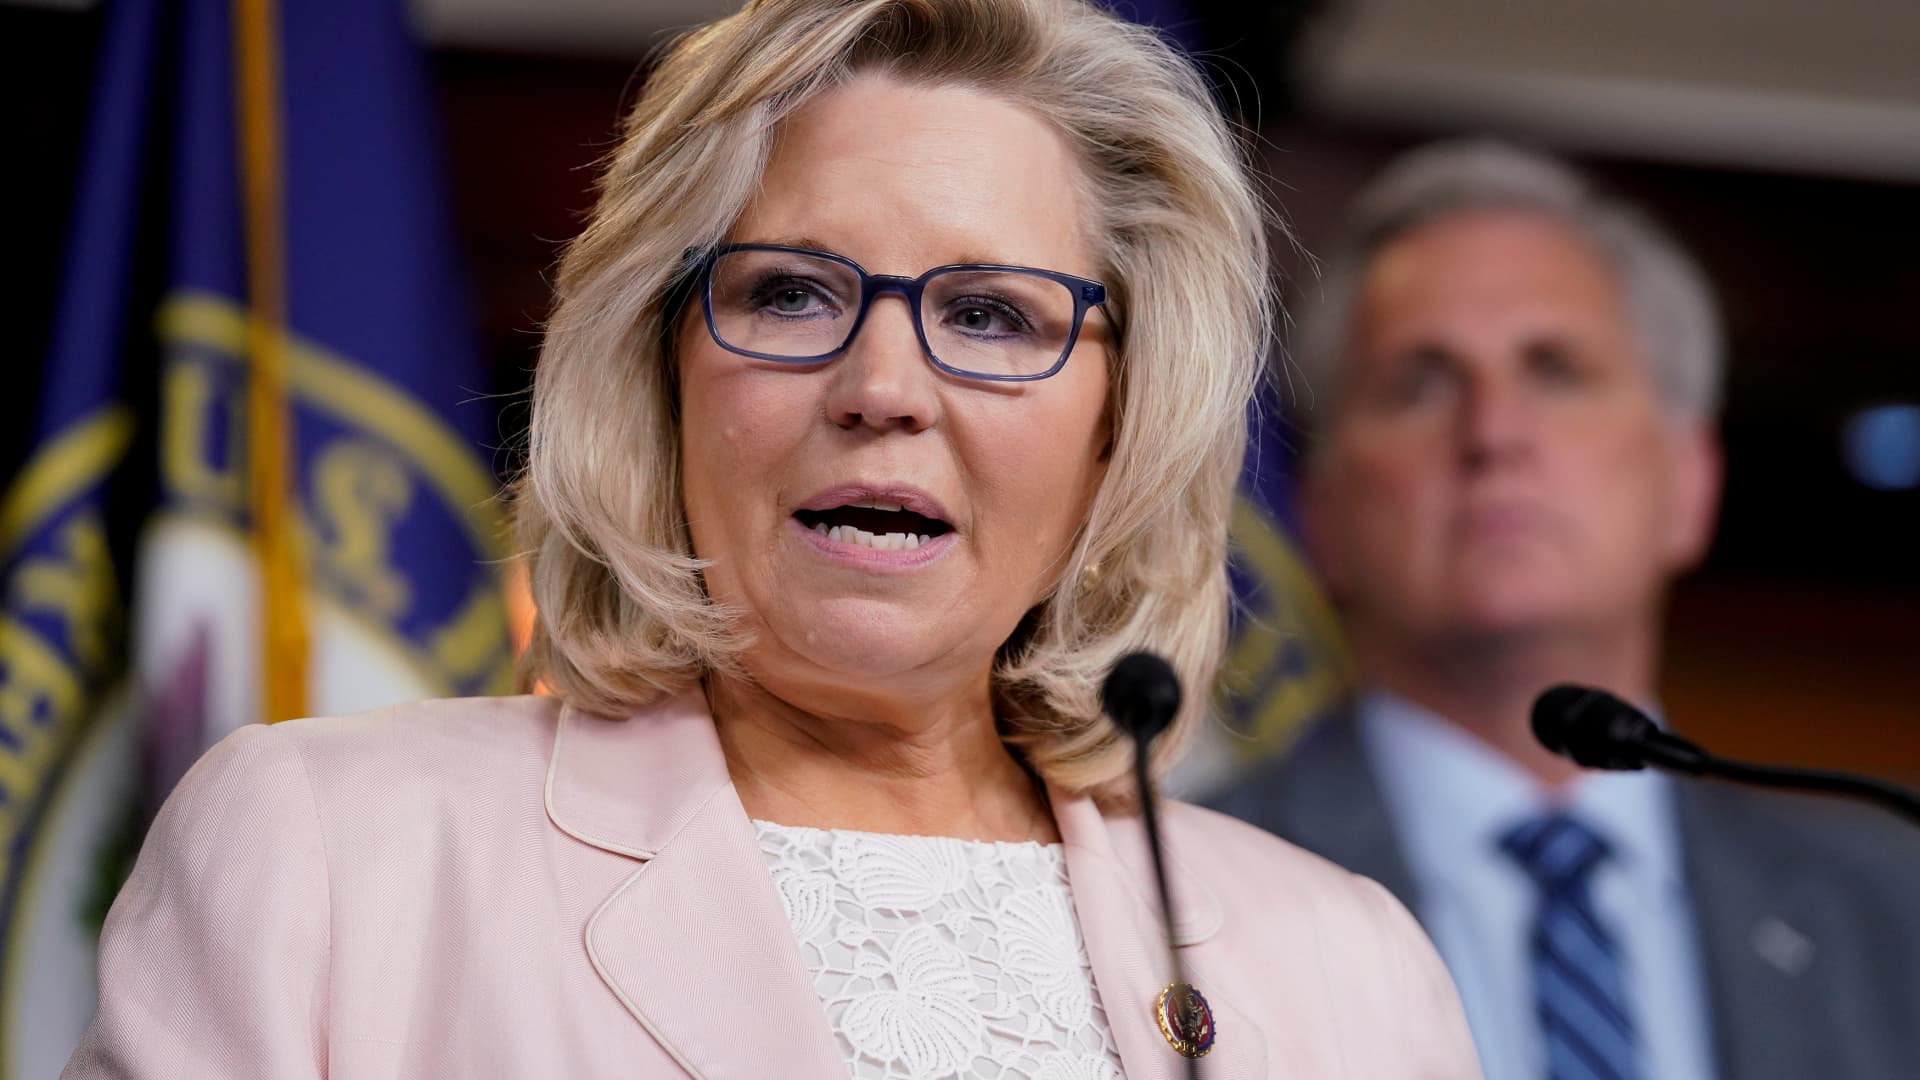 House Republican Conference Chair Liz Cheney speaks at a news conference on Capitol Hill in Washington, May 8, 2019.